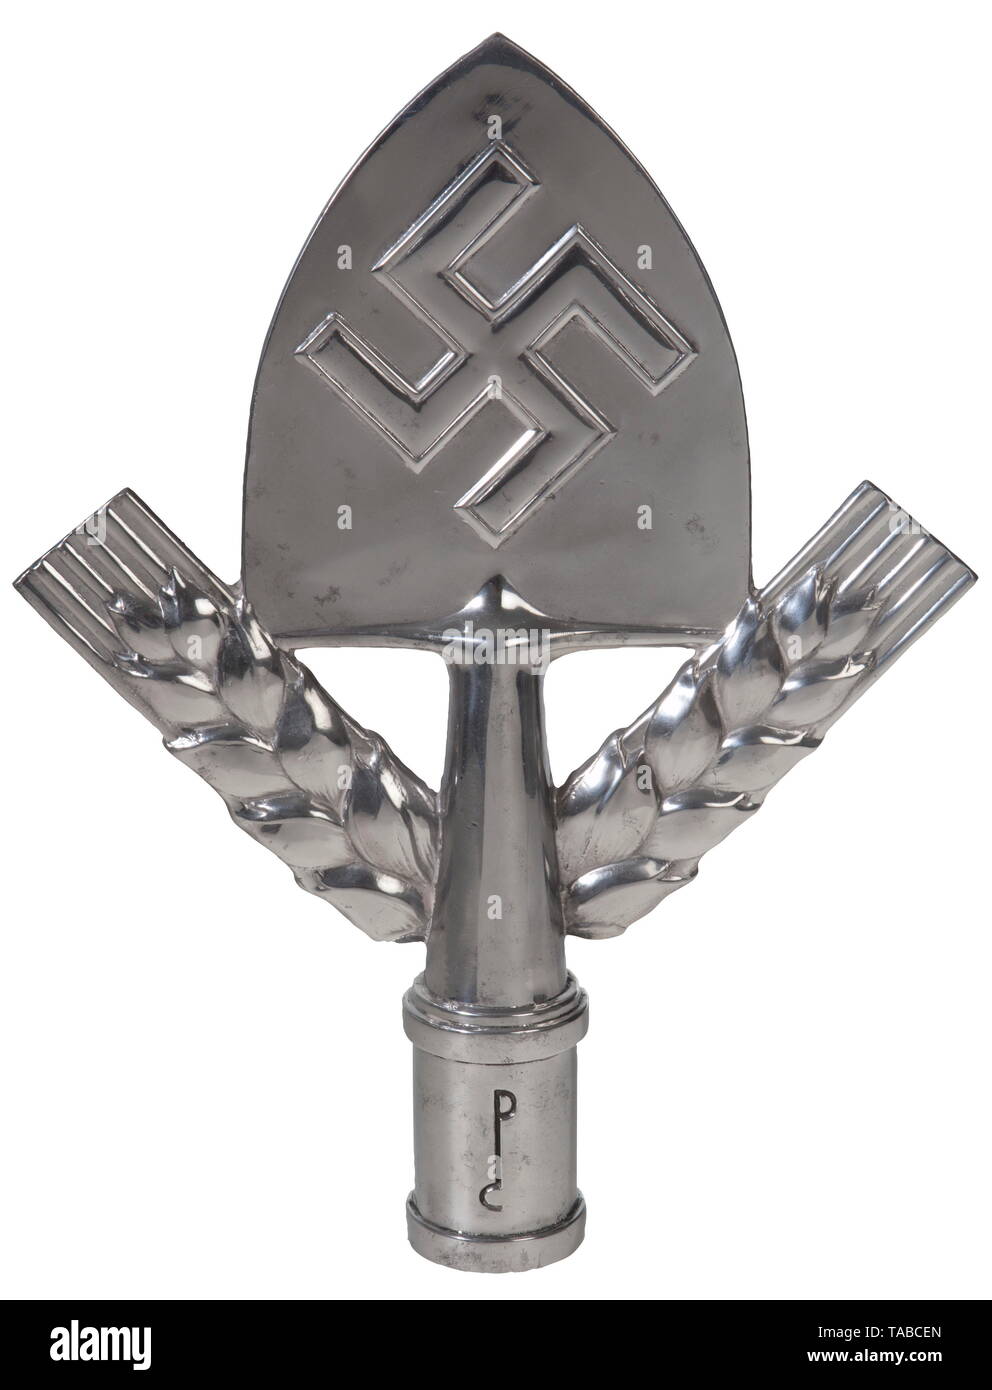 An RAD pole top Polished aluminium spade with swastika and wheat sheaves  with pole cup stamped with designer's initials "PC" and on bottom edge  "Ges. Gesch", "JMME & SOHN". Height 30 cm.